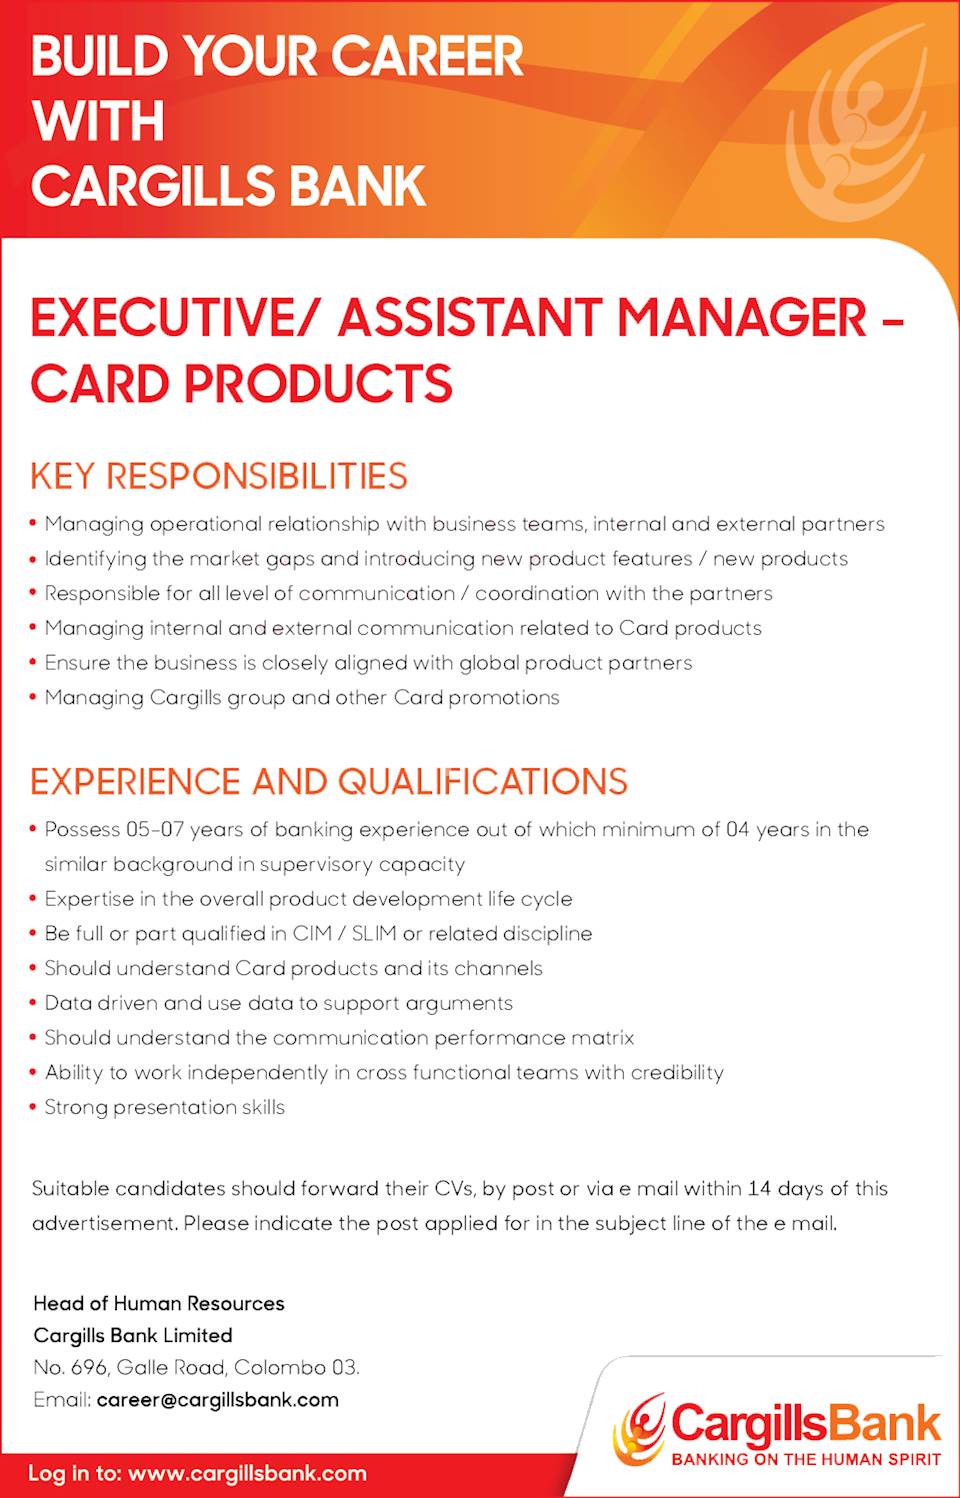 Executive / Assistant Manager - Card Products 